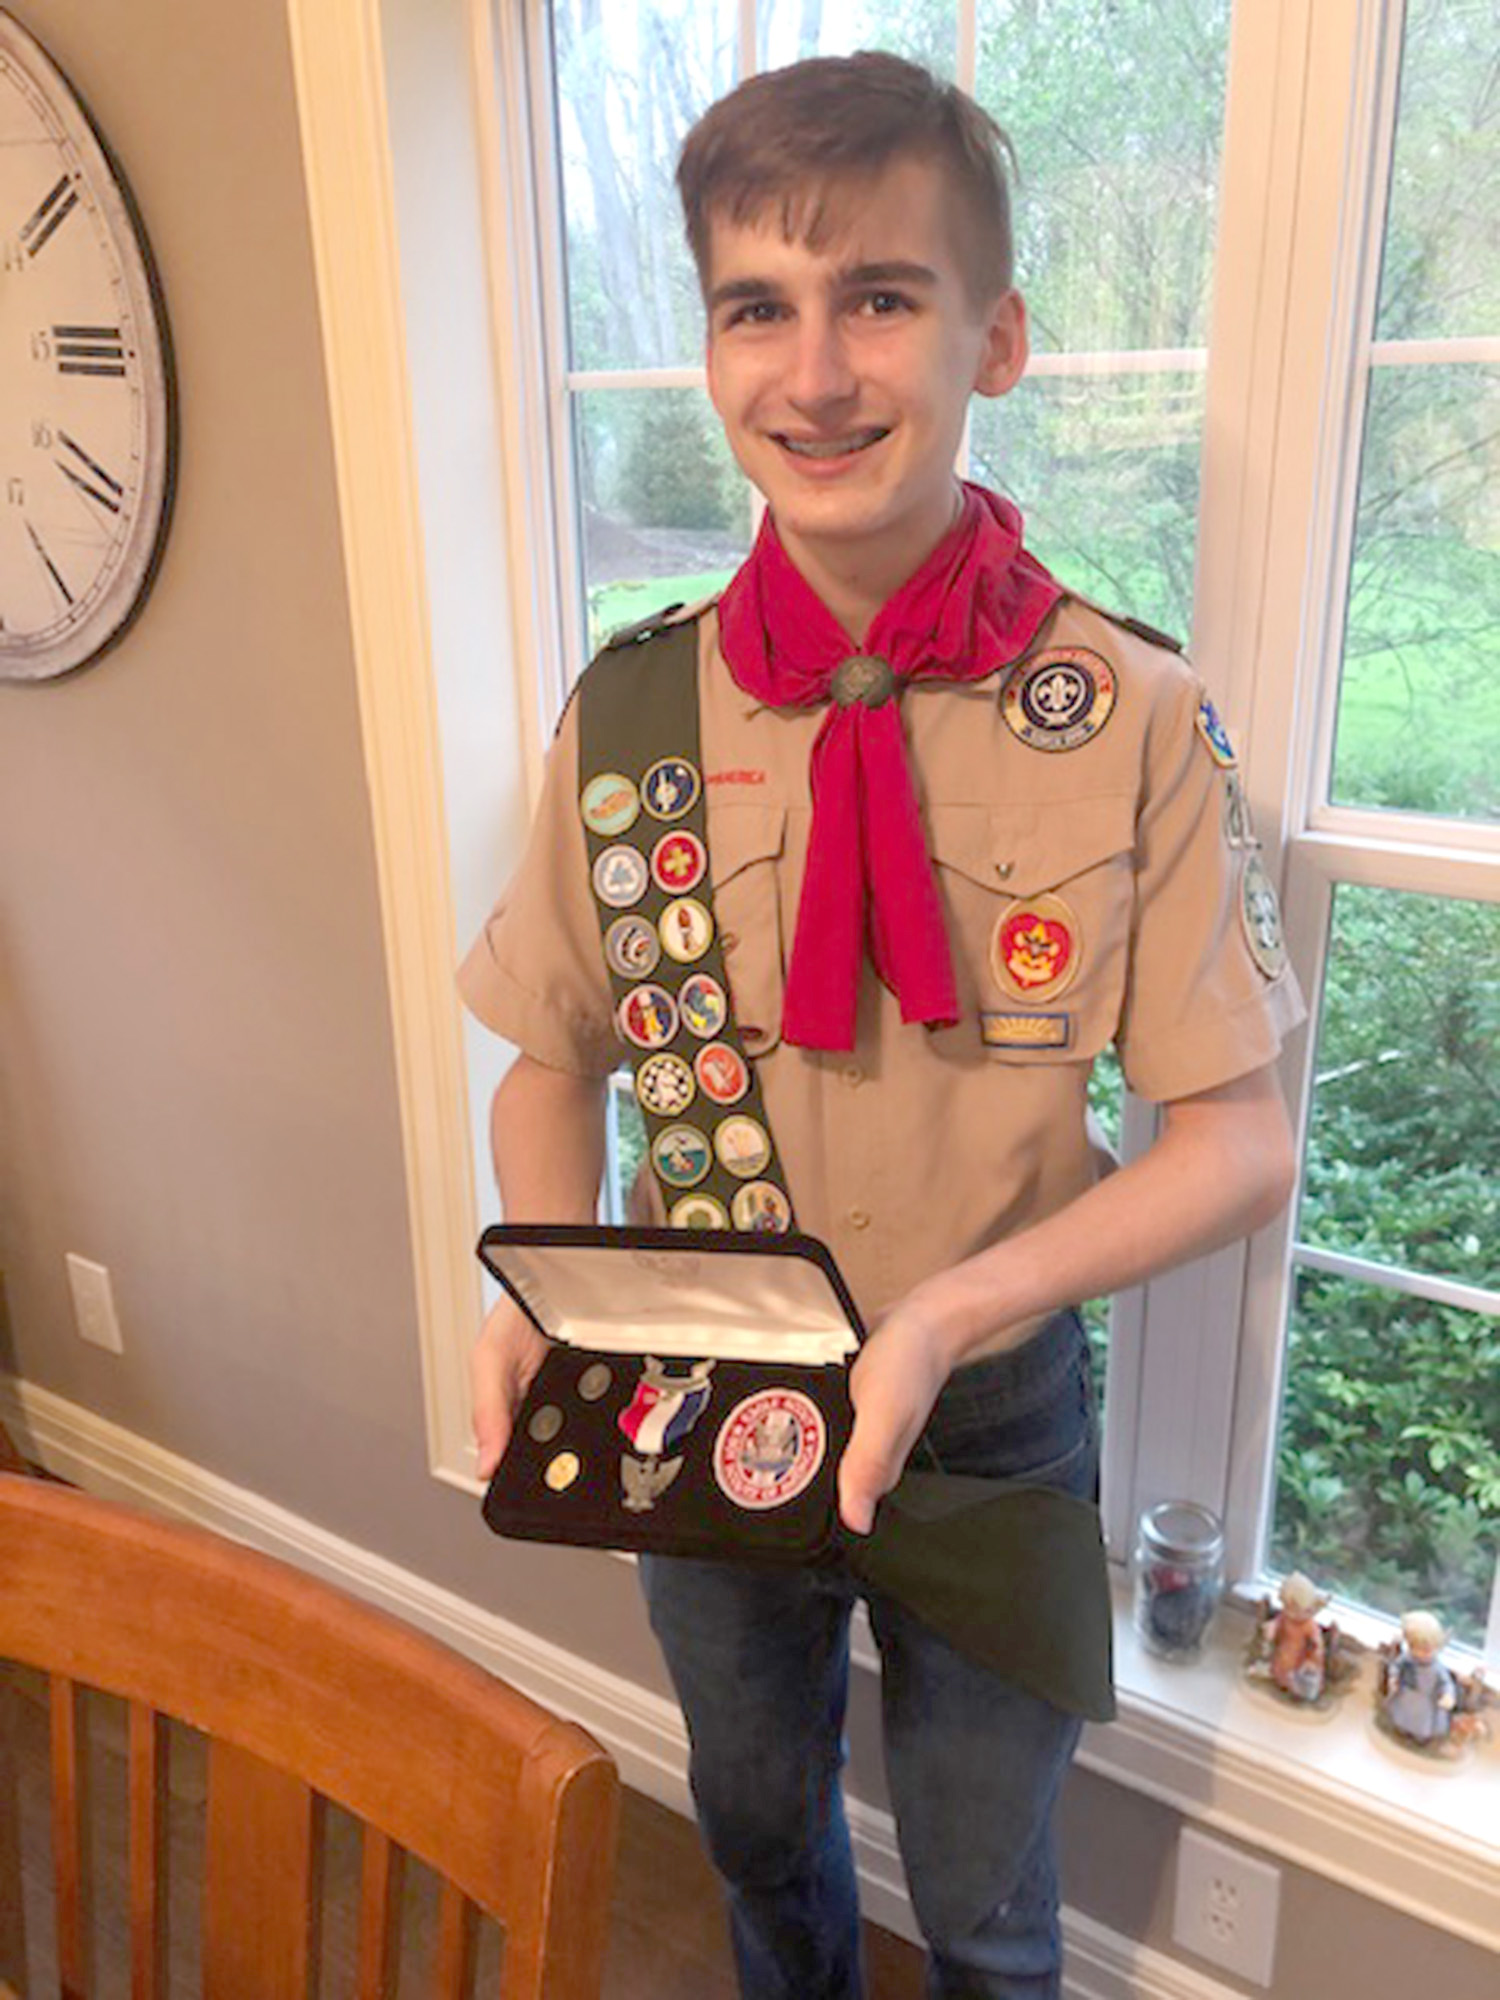 Ryan Casler earns rank of Eagle Scout